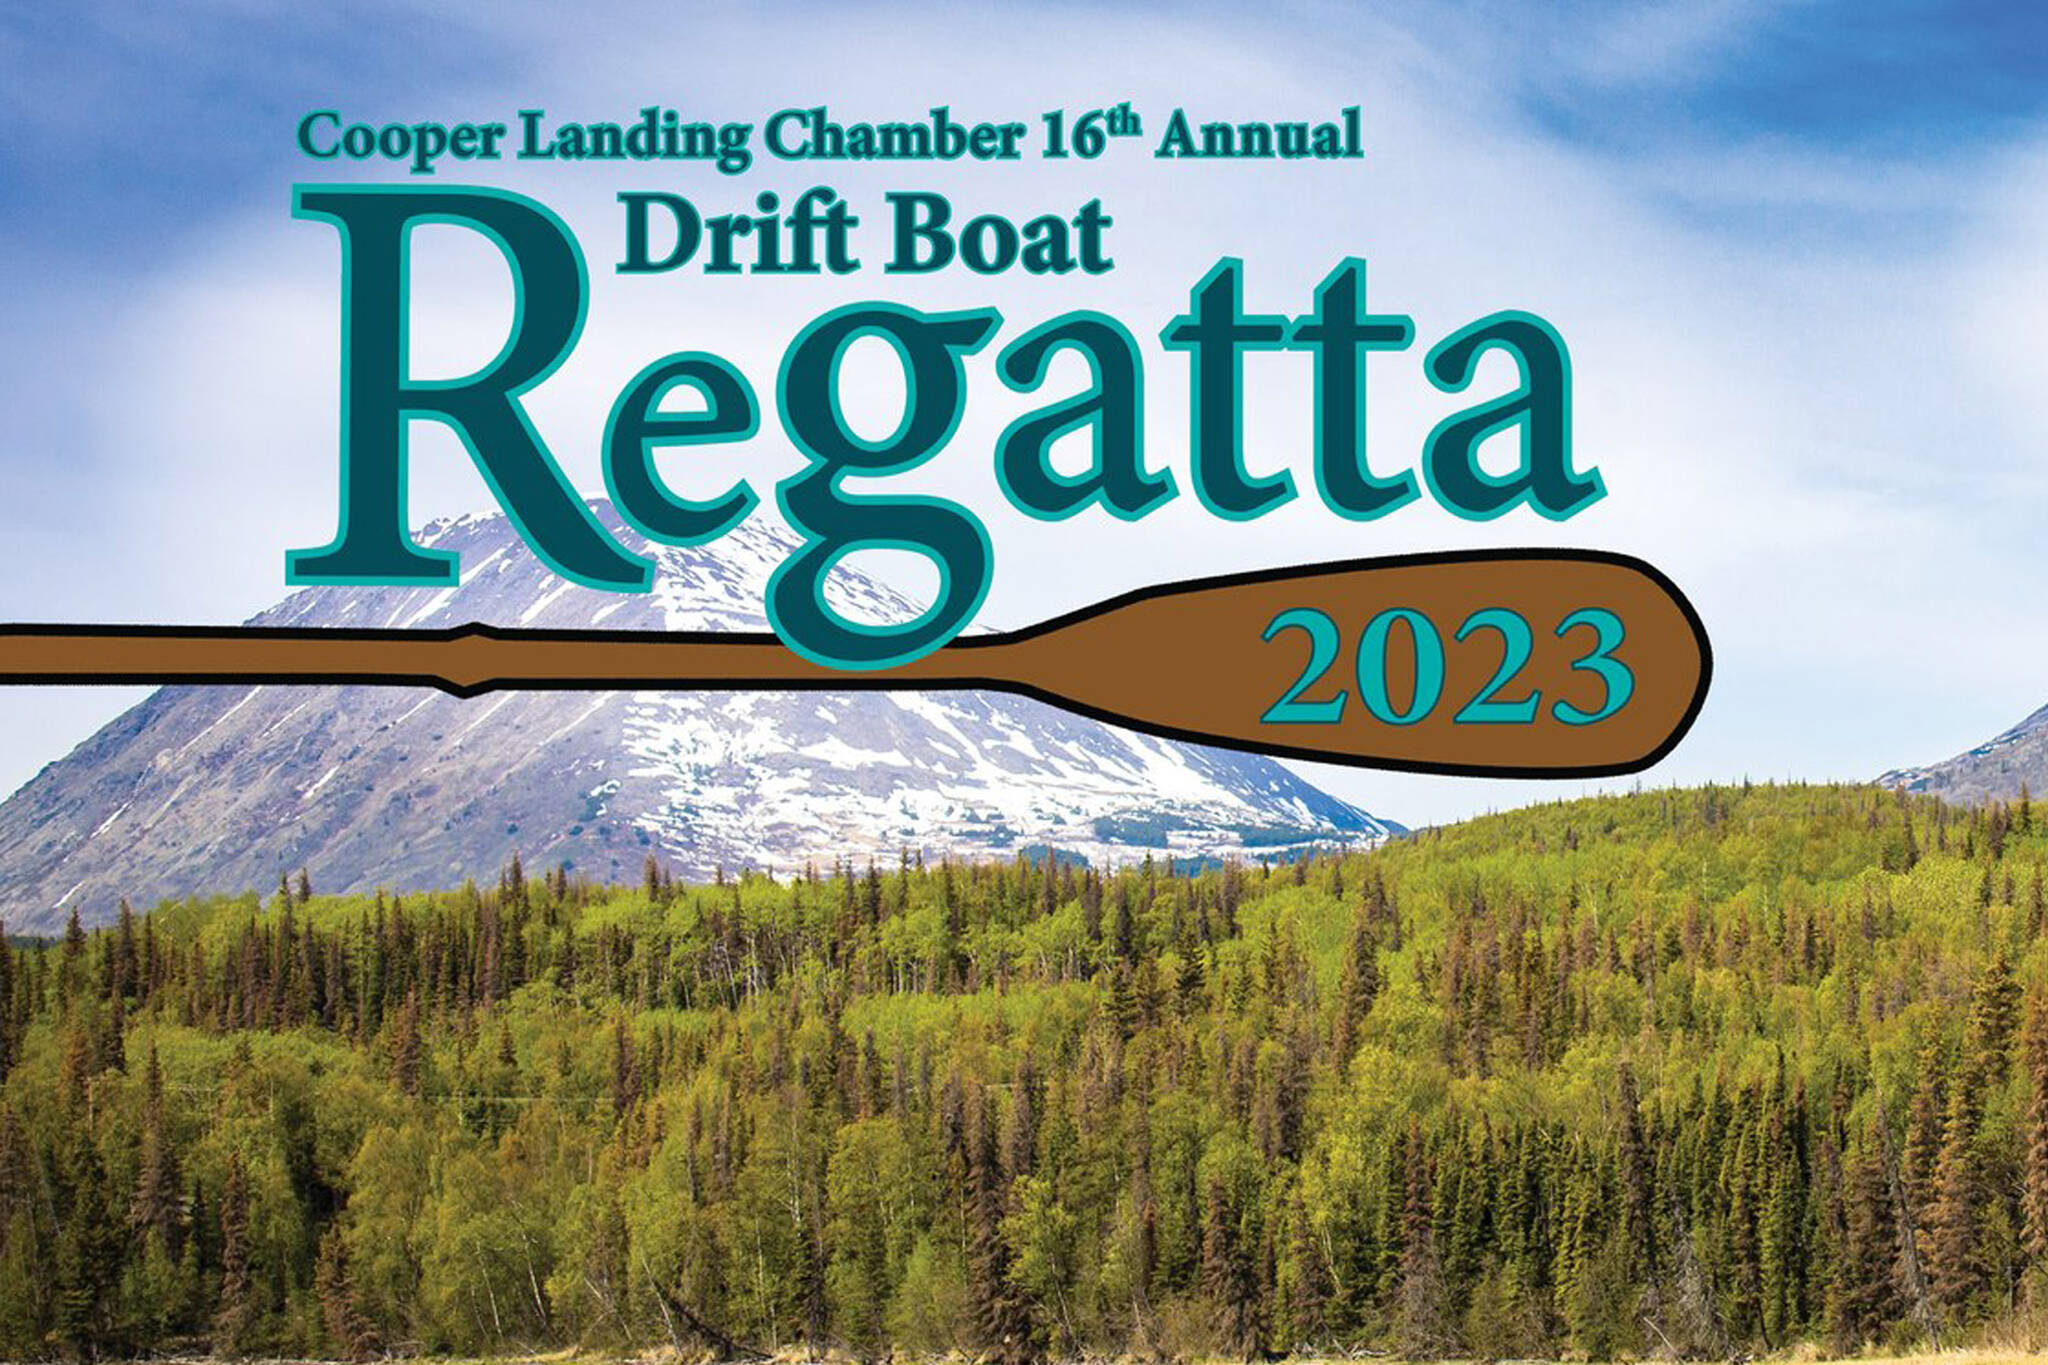 Poster for the 16th Annual Cooper Landing Chamber of Commerce Drift Boat Regatta. (Promotional Image)